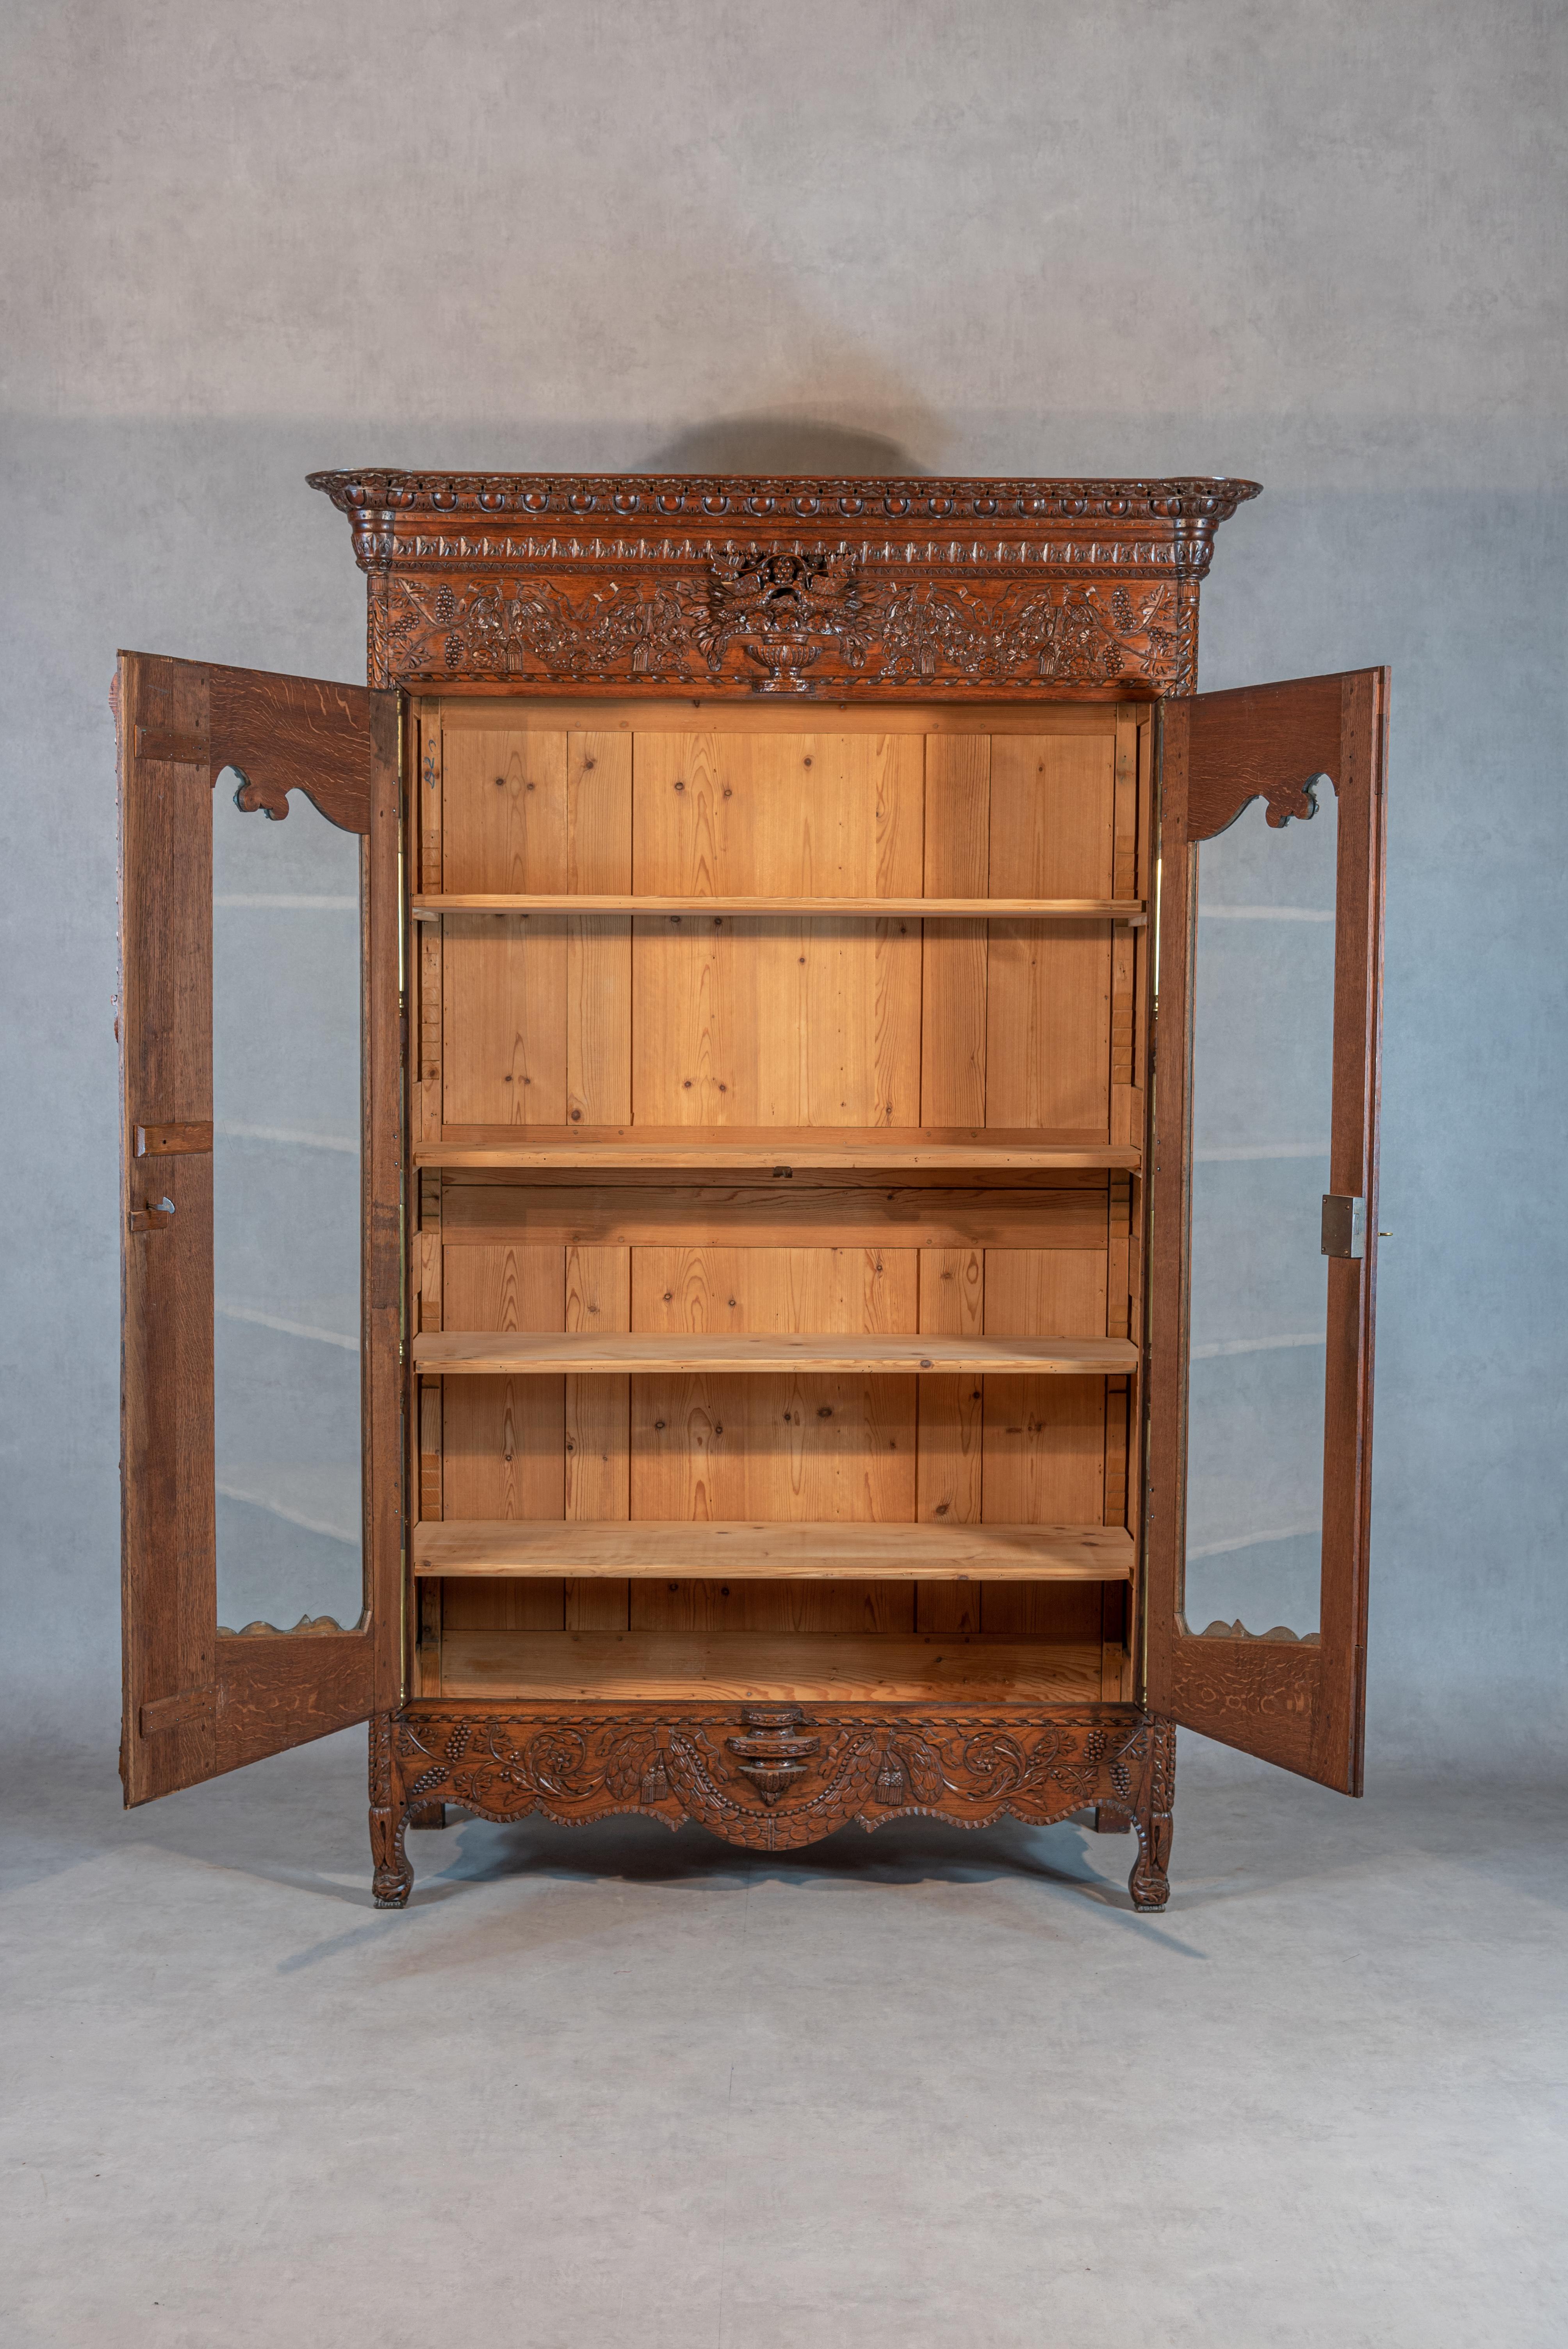 This exquisite 19th-century French Bridal Armoire with glass doors is a true masterpiece. Crafted from solid oak, this piece of furniture boasts impressive woodwork that is sure to leave any onlooker in awe. The armoire features sculpted ornaments